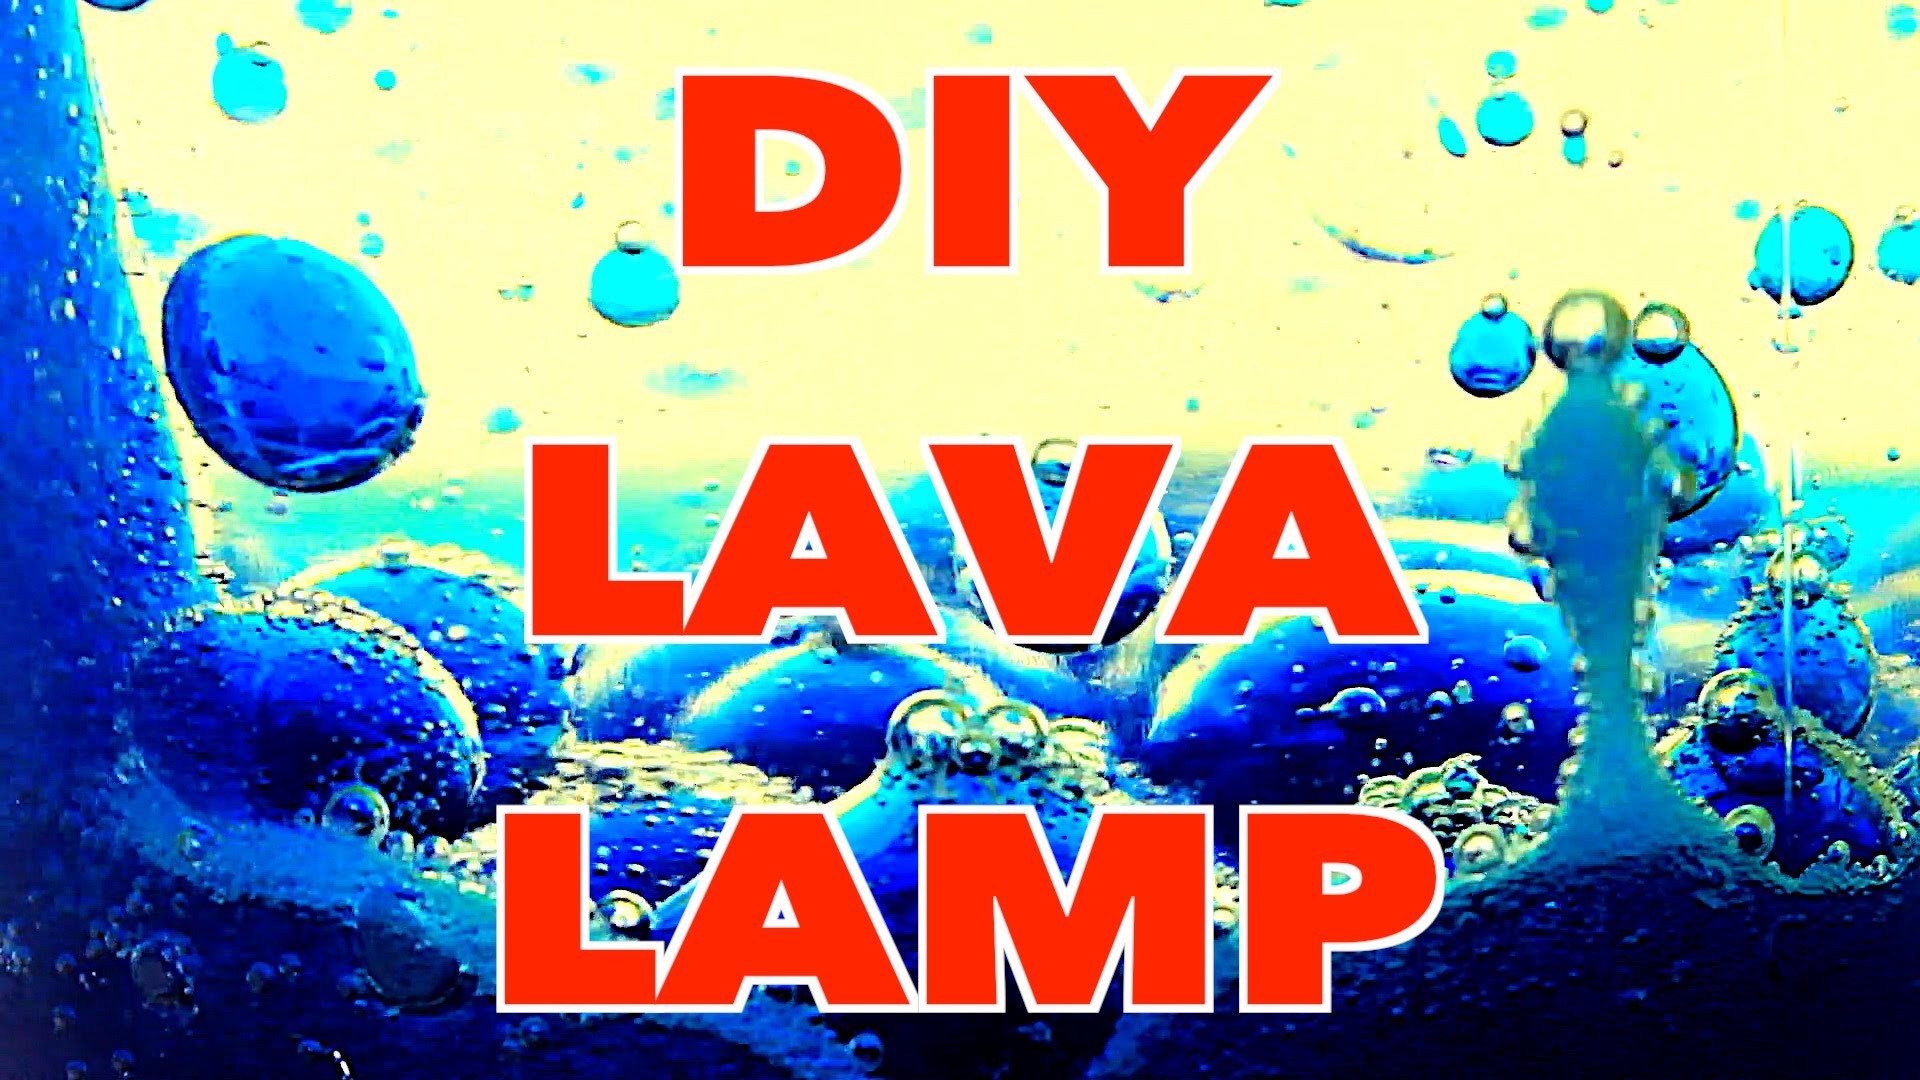 How To Make a DIY Lava Lamp With Alka-Seltzer